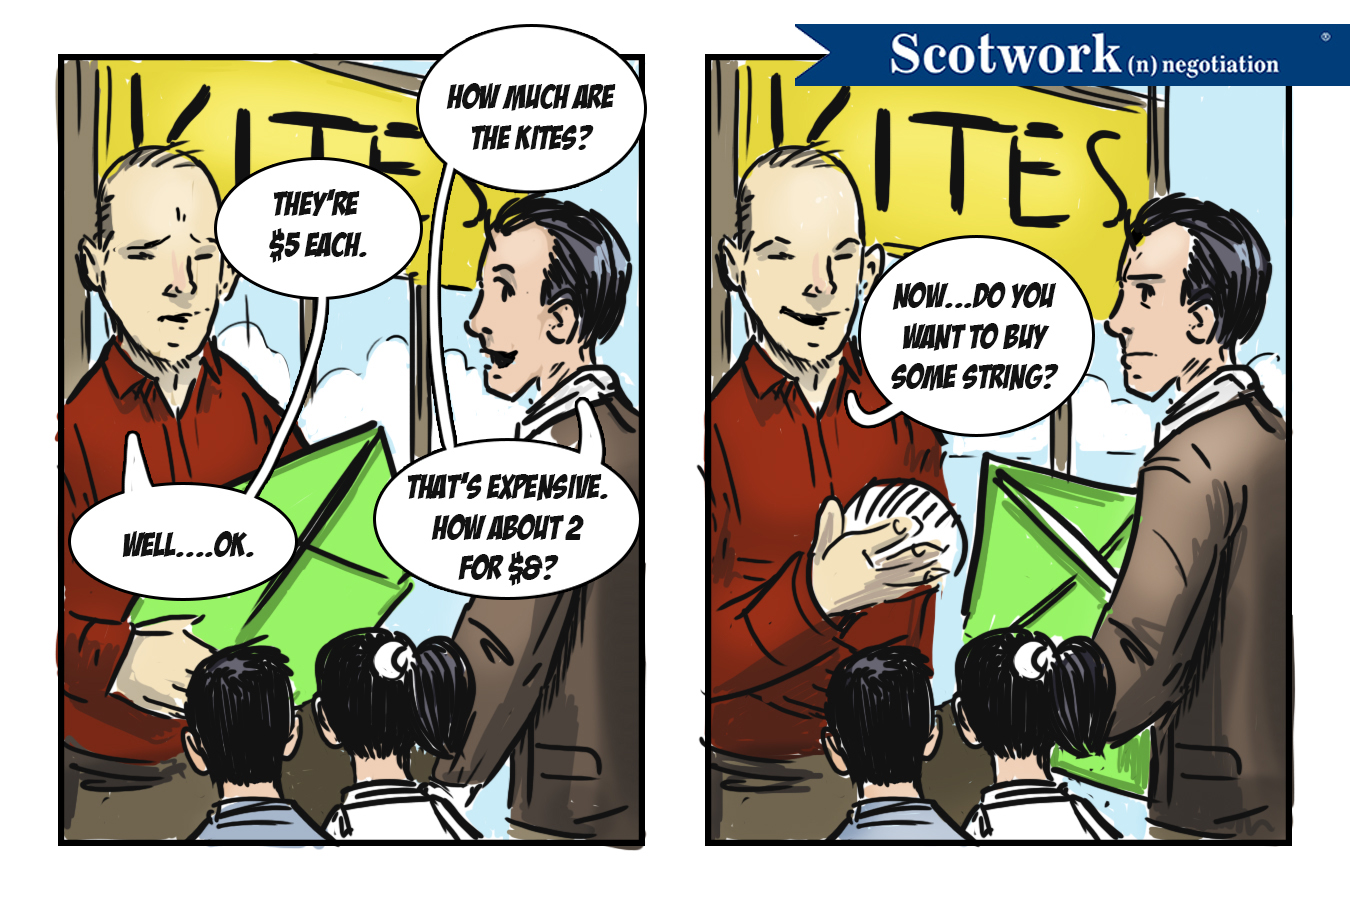 scotwork_comic_2018_02_26_dont_forget_the_string.jpg